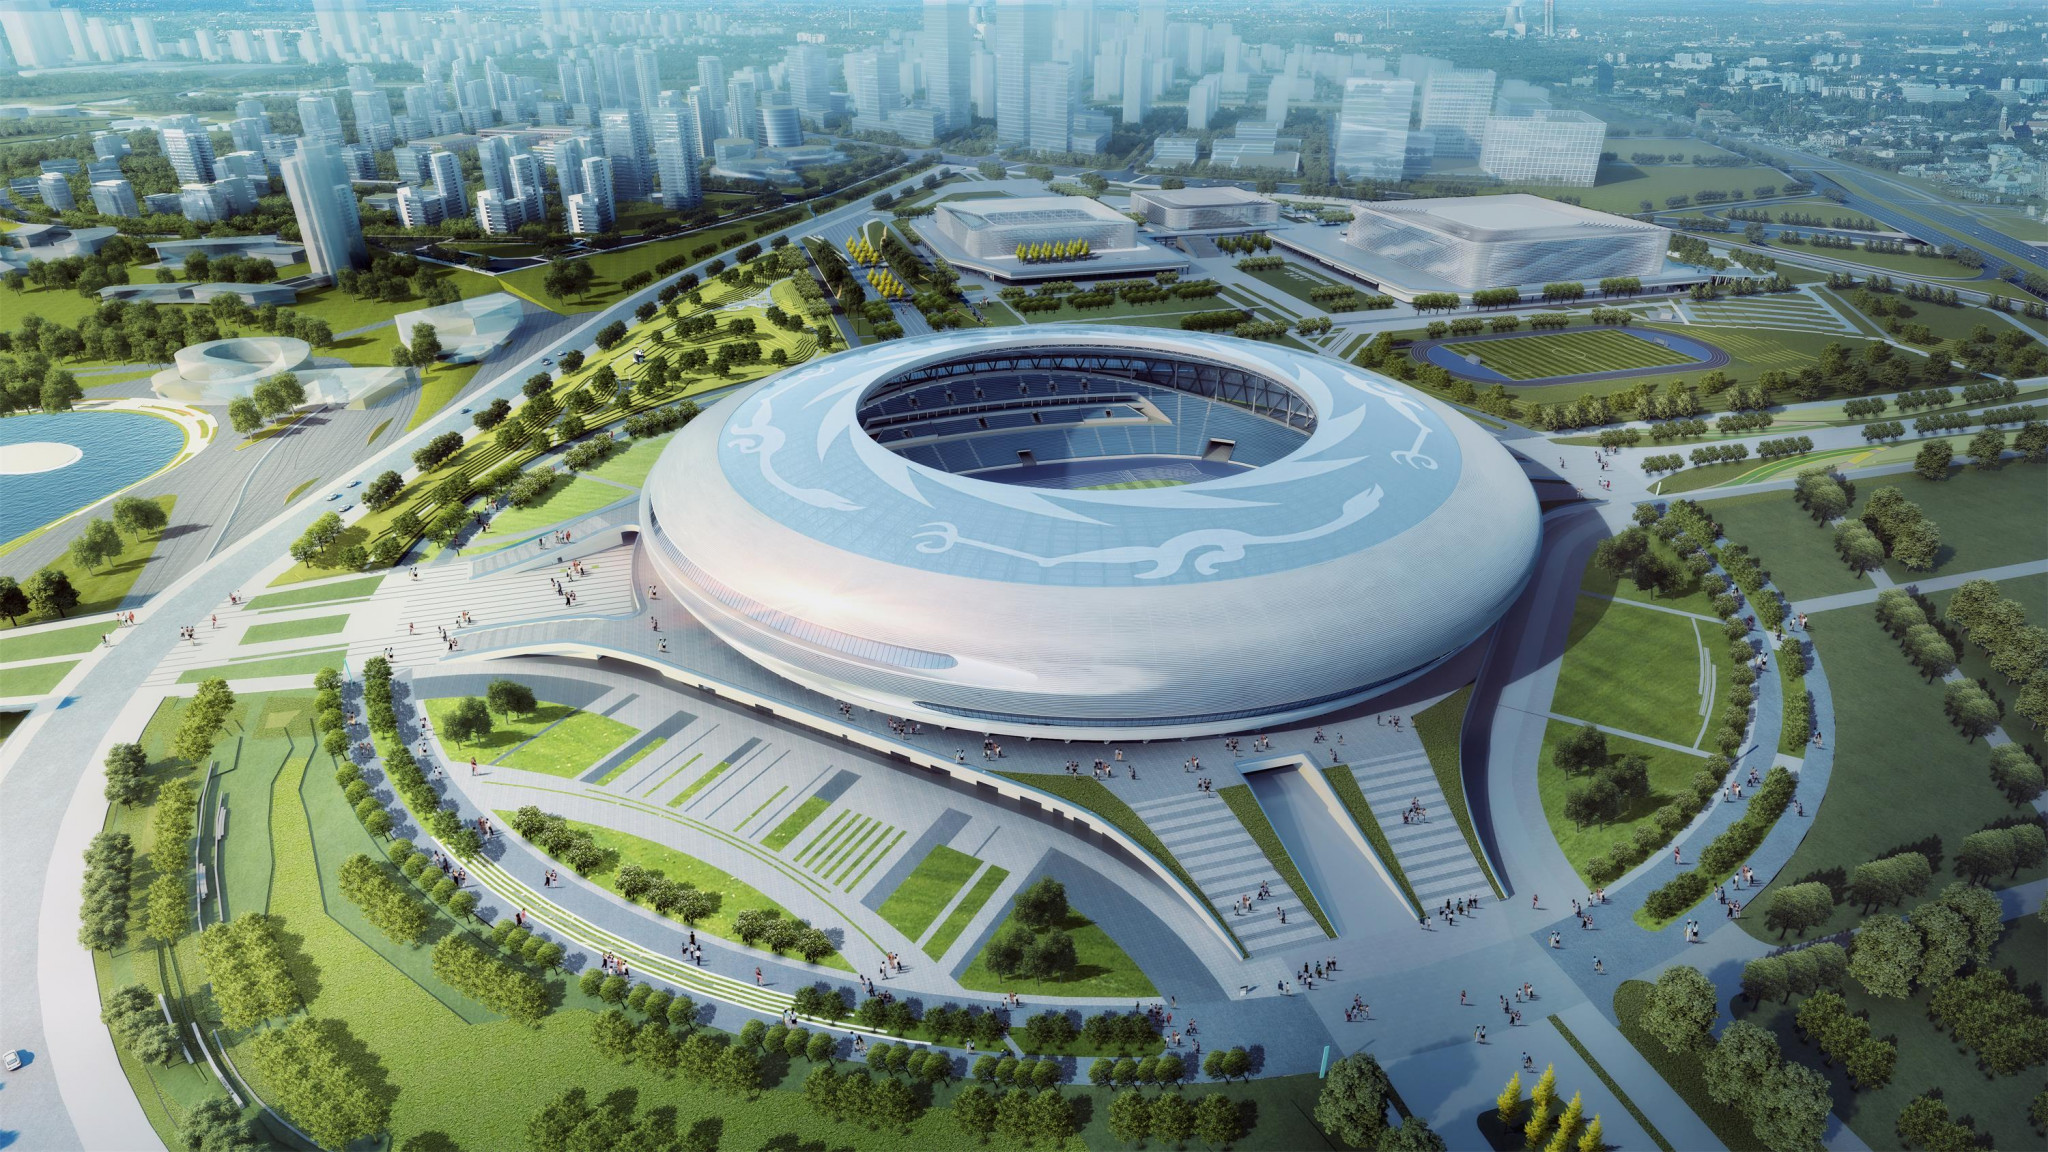 Facilities are to be inspected by delegates heading to Chengdu ©Chengdu 2021